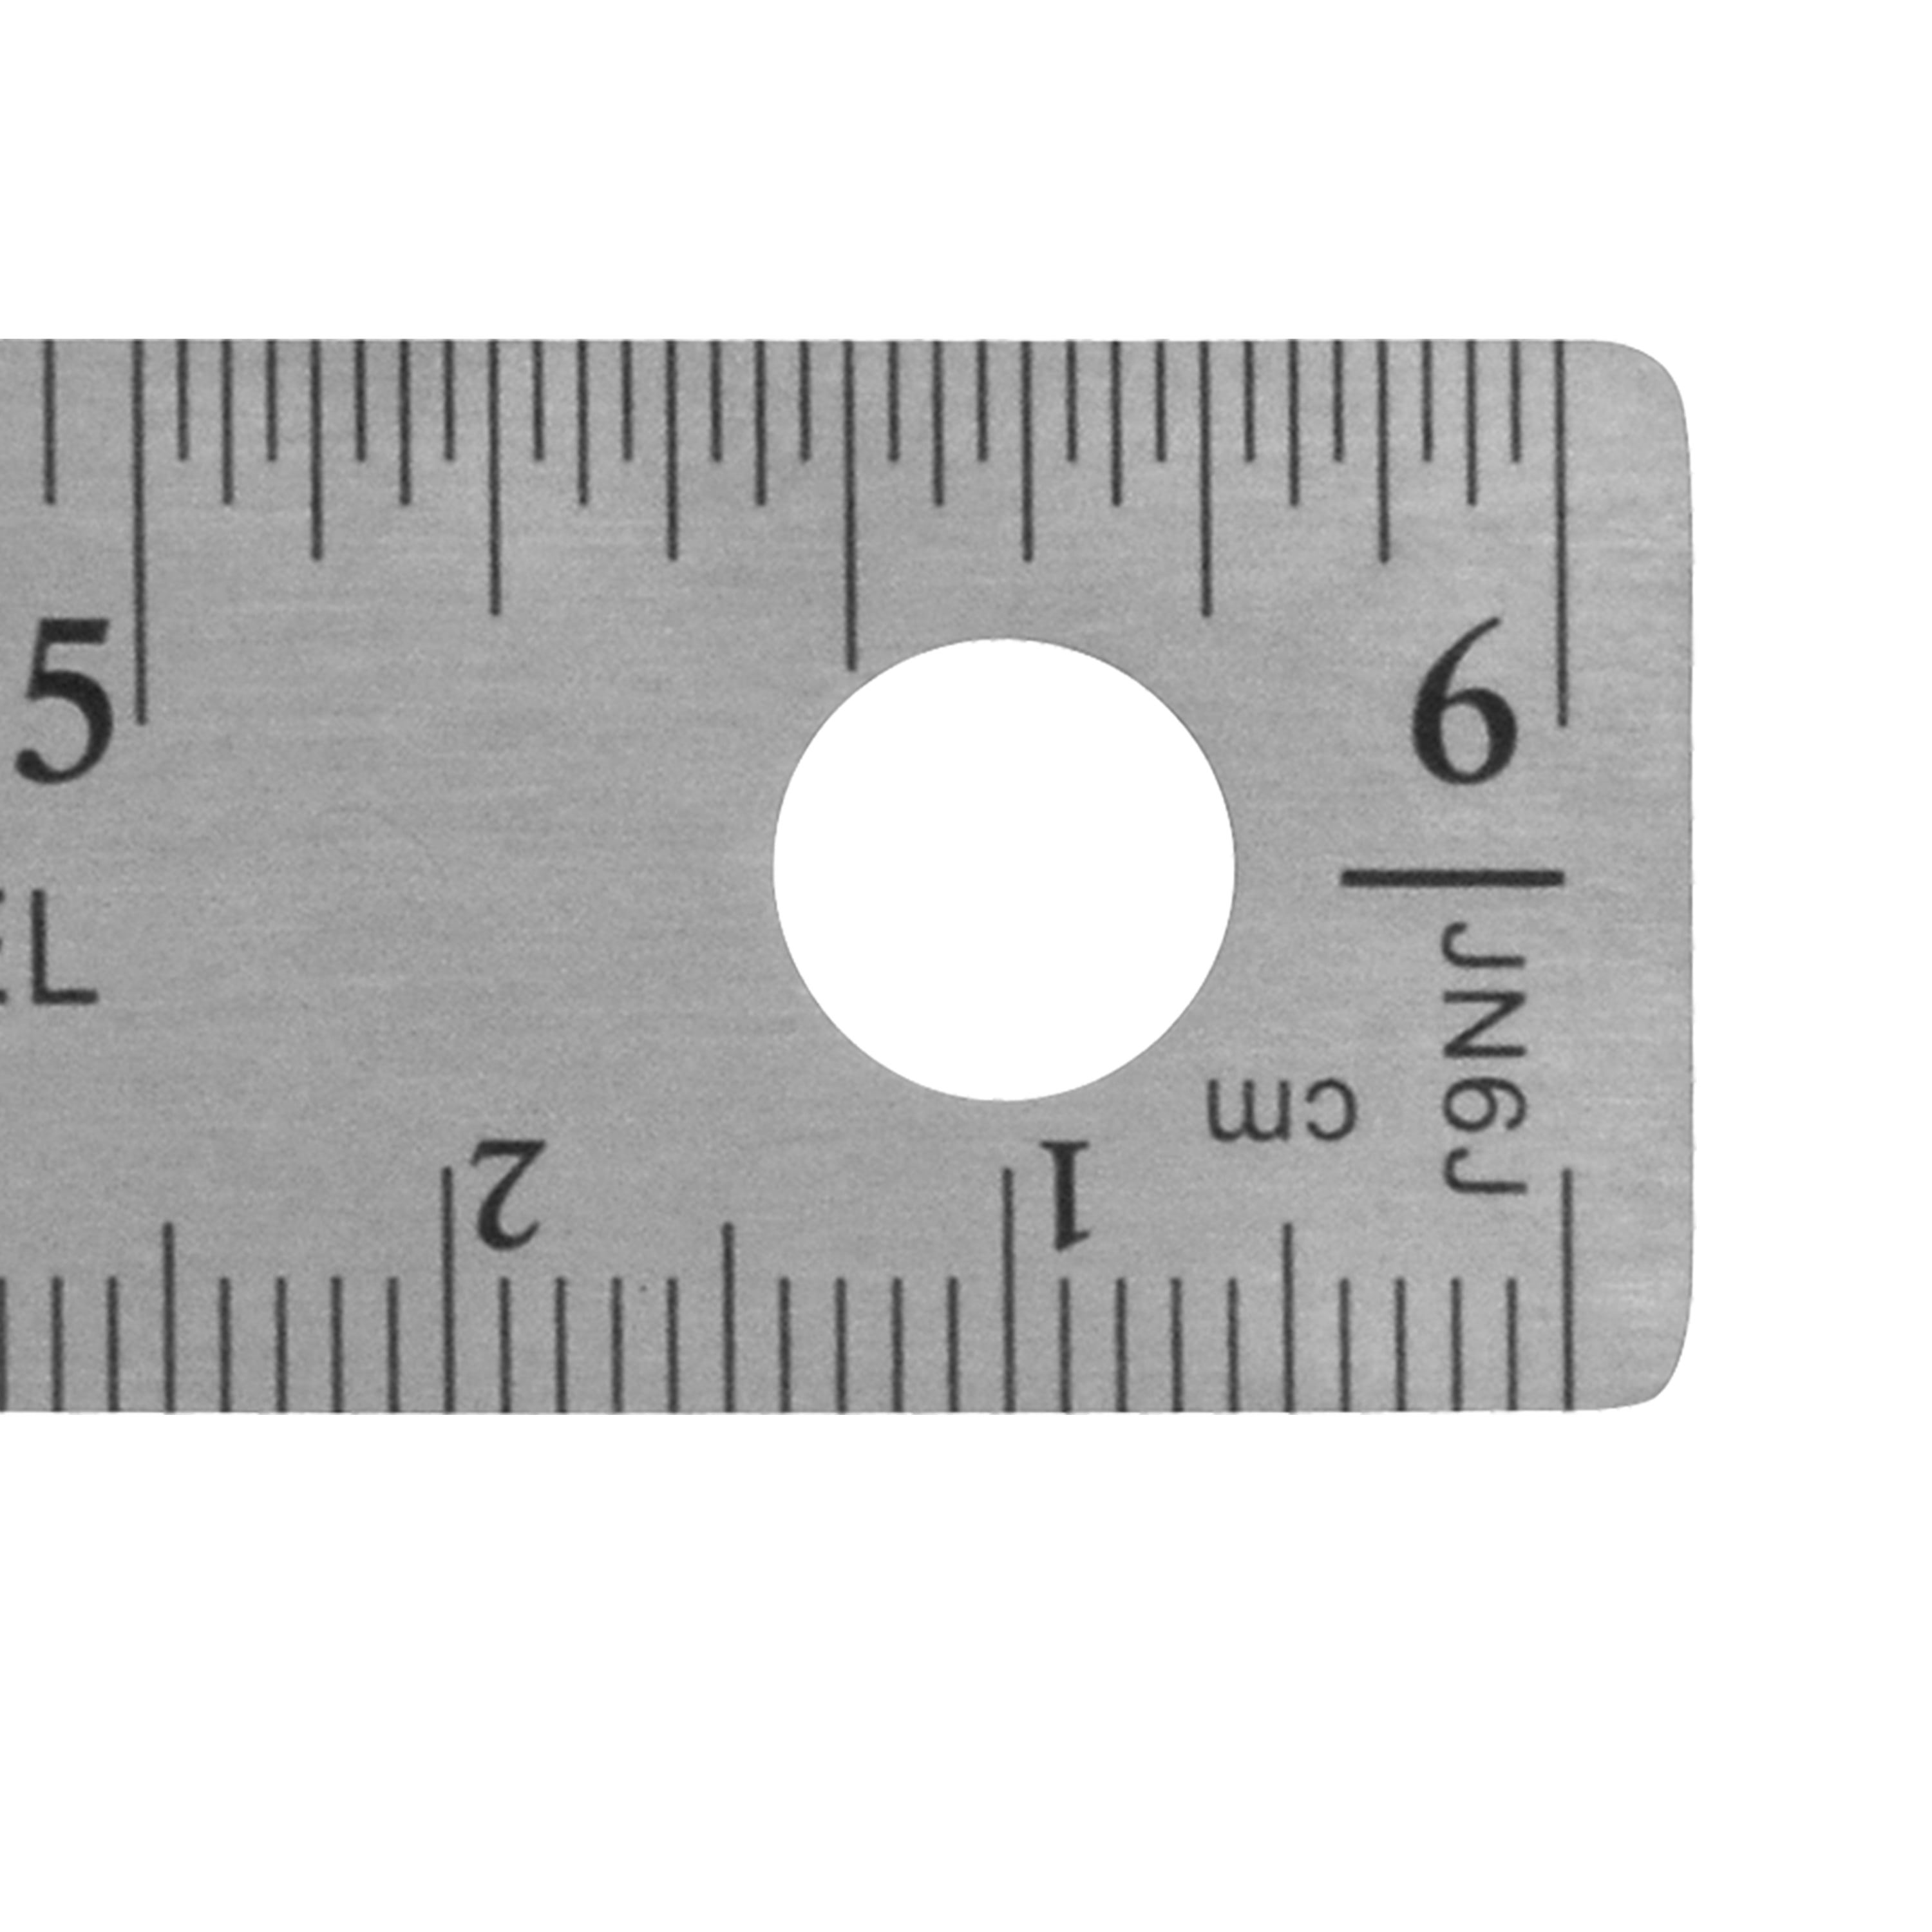 MR-36 Westcott RULER METAL 1ST INCH 32NDS - REST 16THS : PartsSource :  PartsSource - Healthcare Products and Solutions